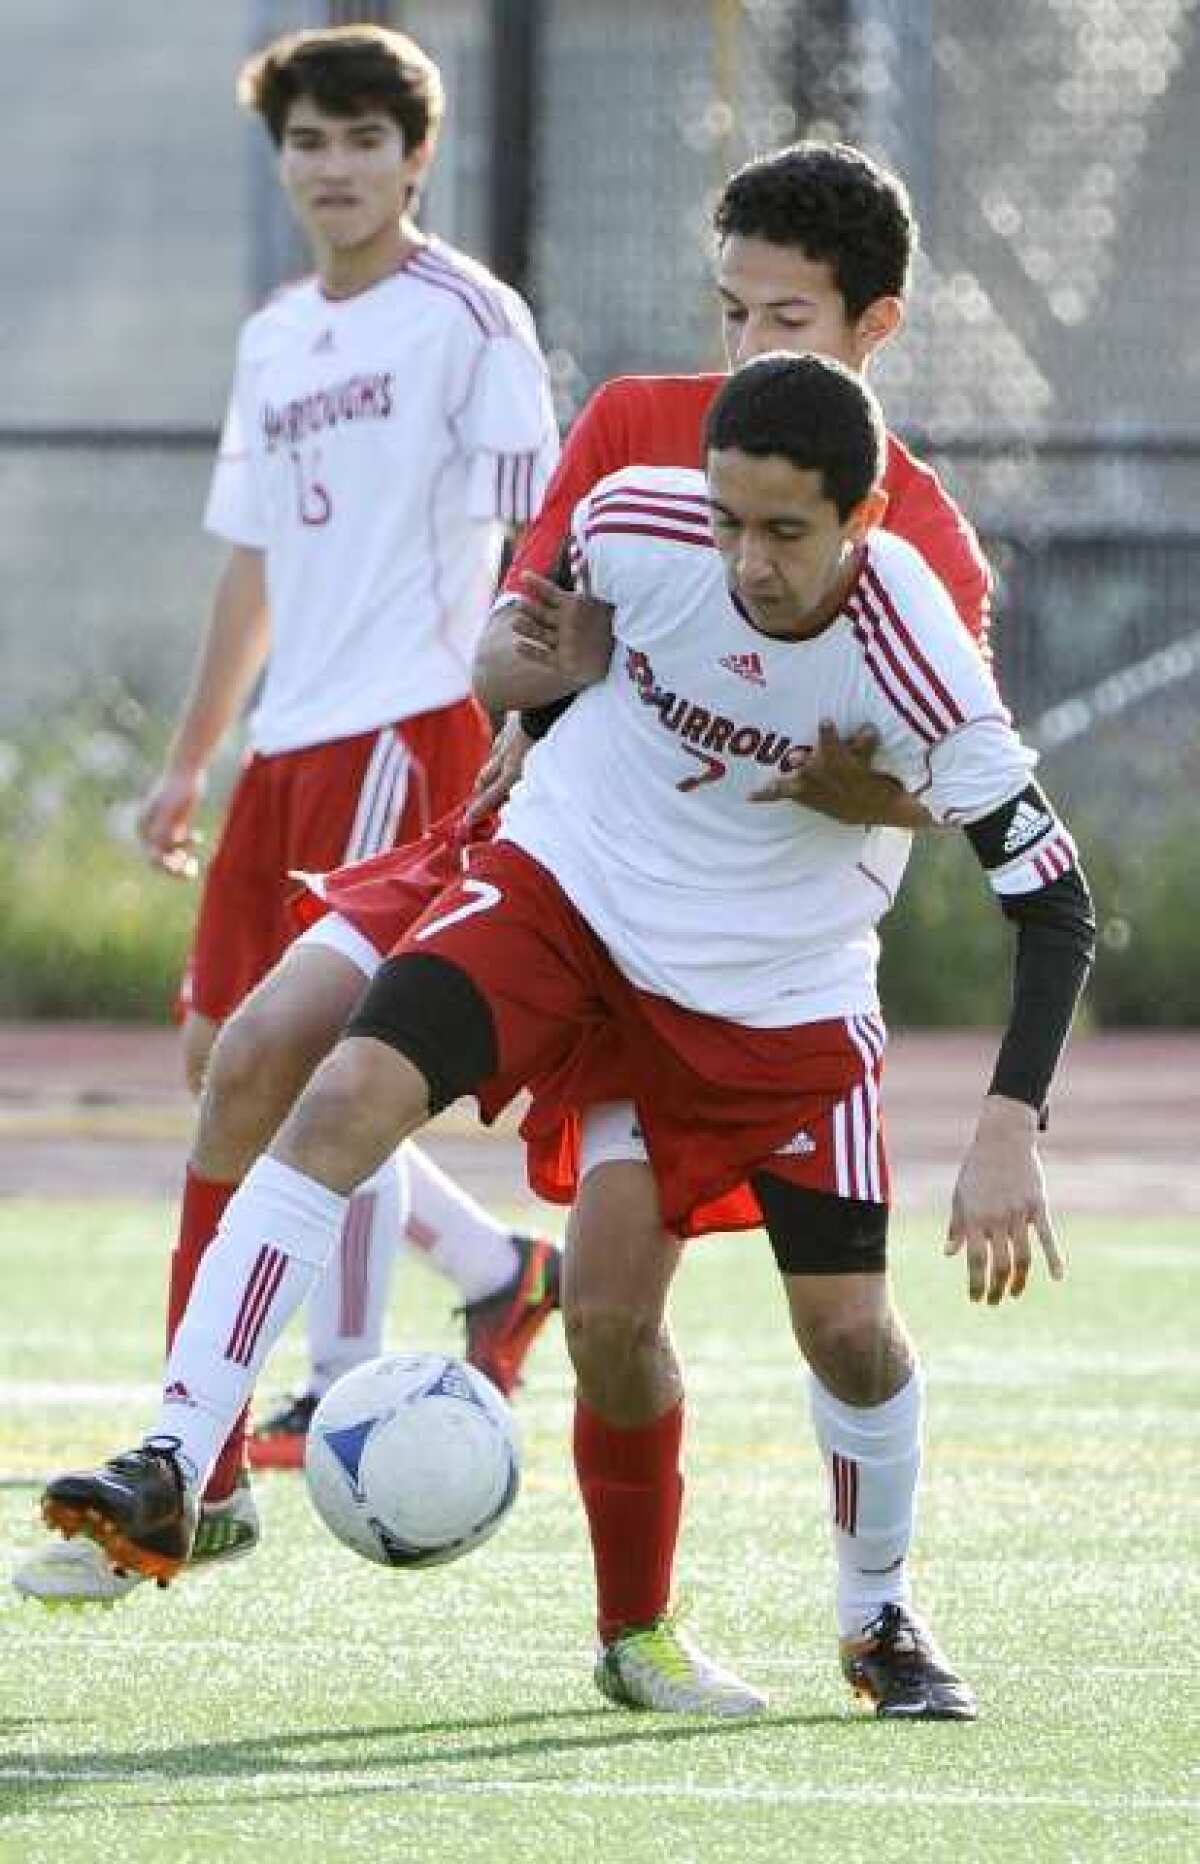 Burroughs' Brian Arzate, with Pasadena defender Gerardo Espinoza reaching through him, controls the ball in the first half in a Pacific League boys soccer match at Burroughs High School in Burbank on Monday, January 28, 2013. Pasadena won the match 3-1. (Tim Berger/Staff Photographer)